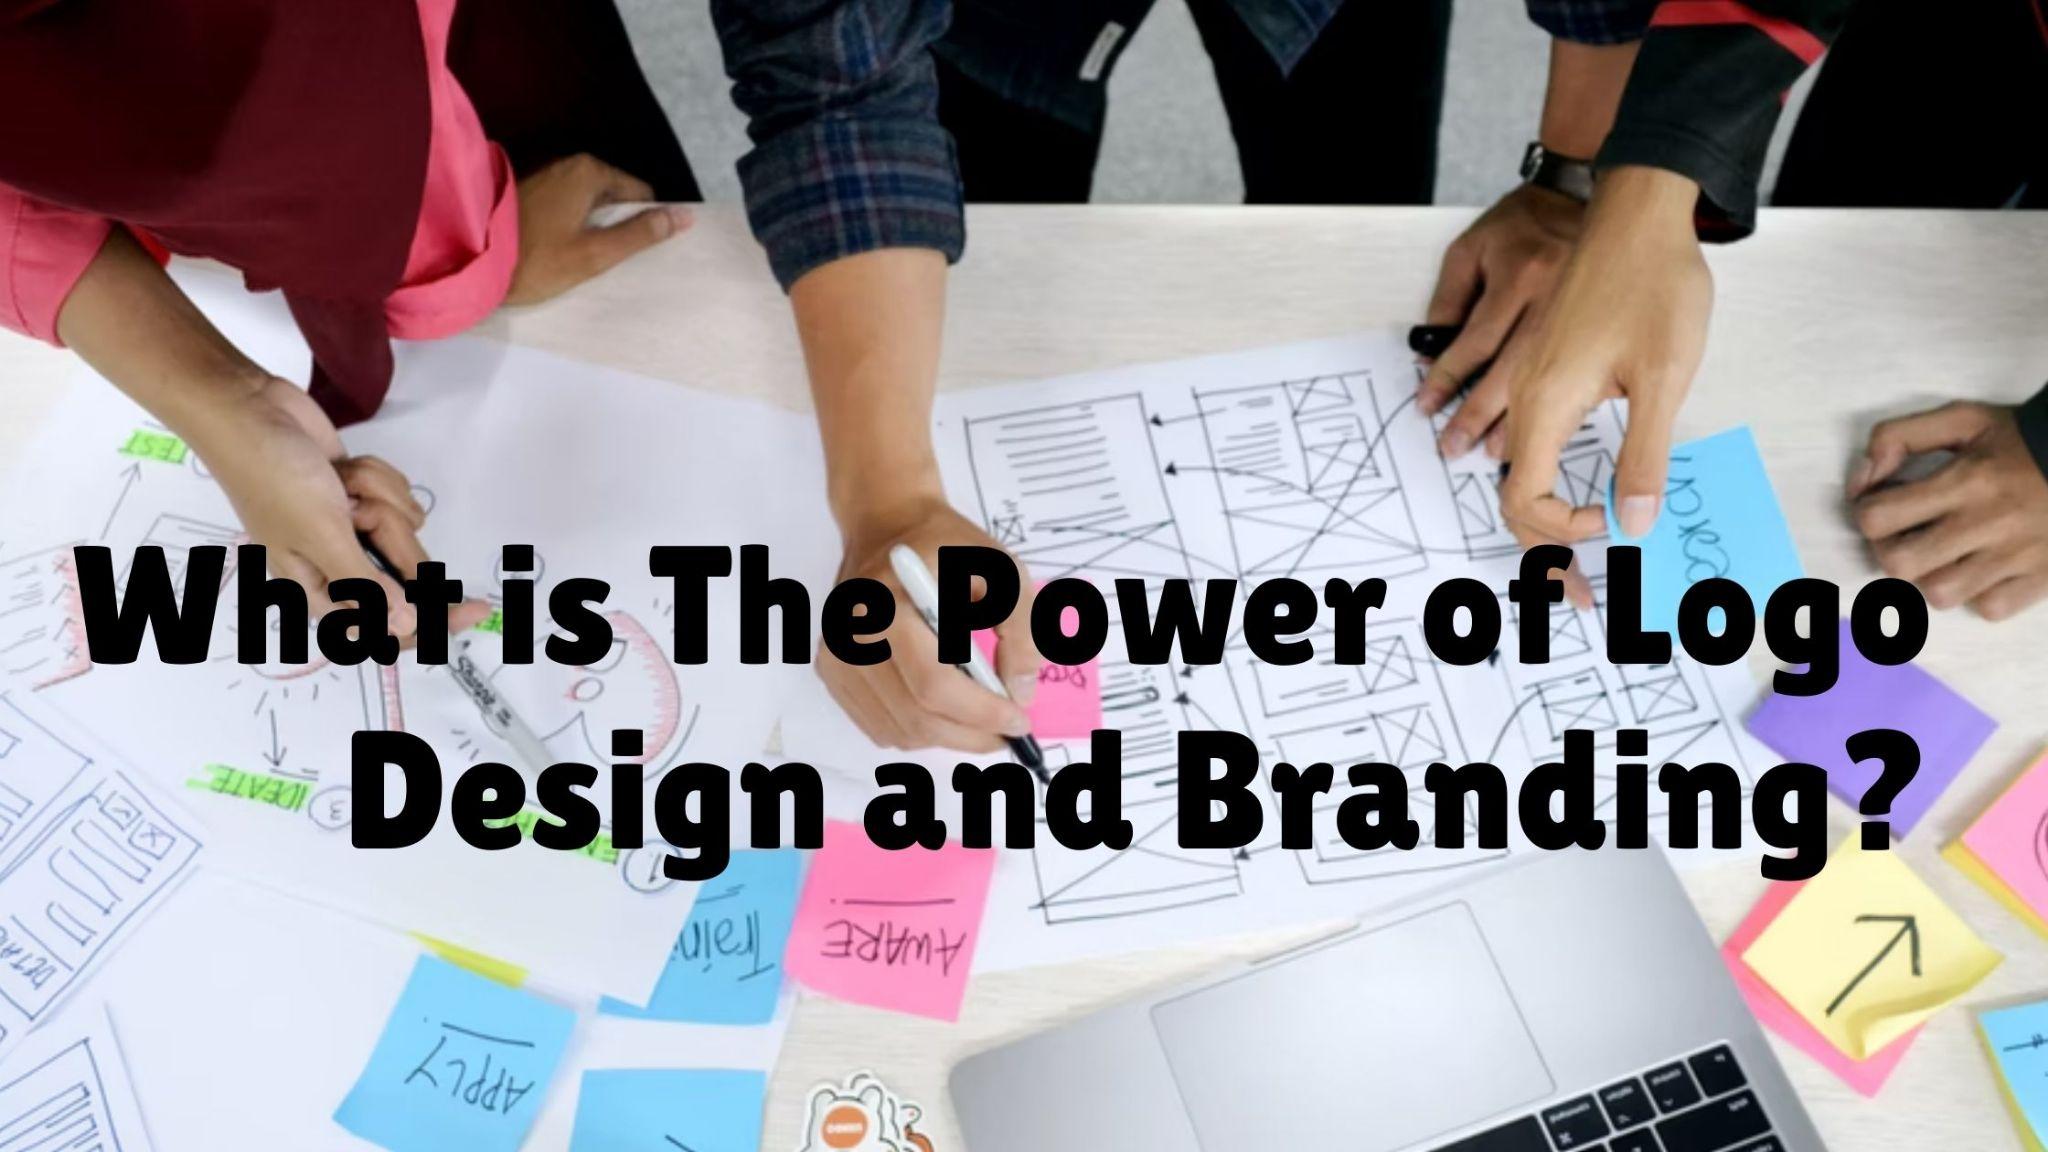 What is The Power of Logo Design and Branding?